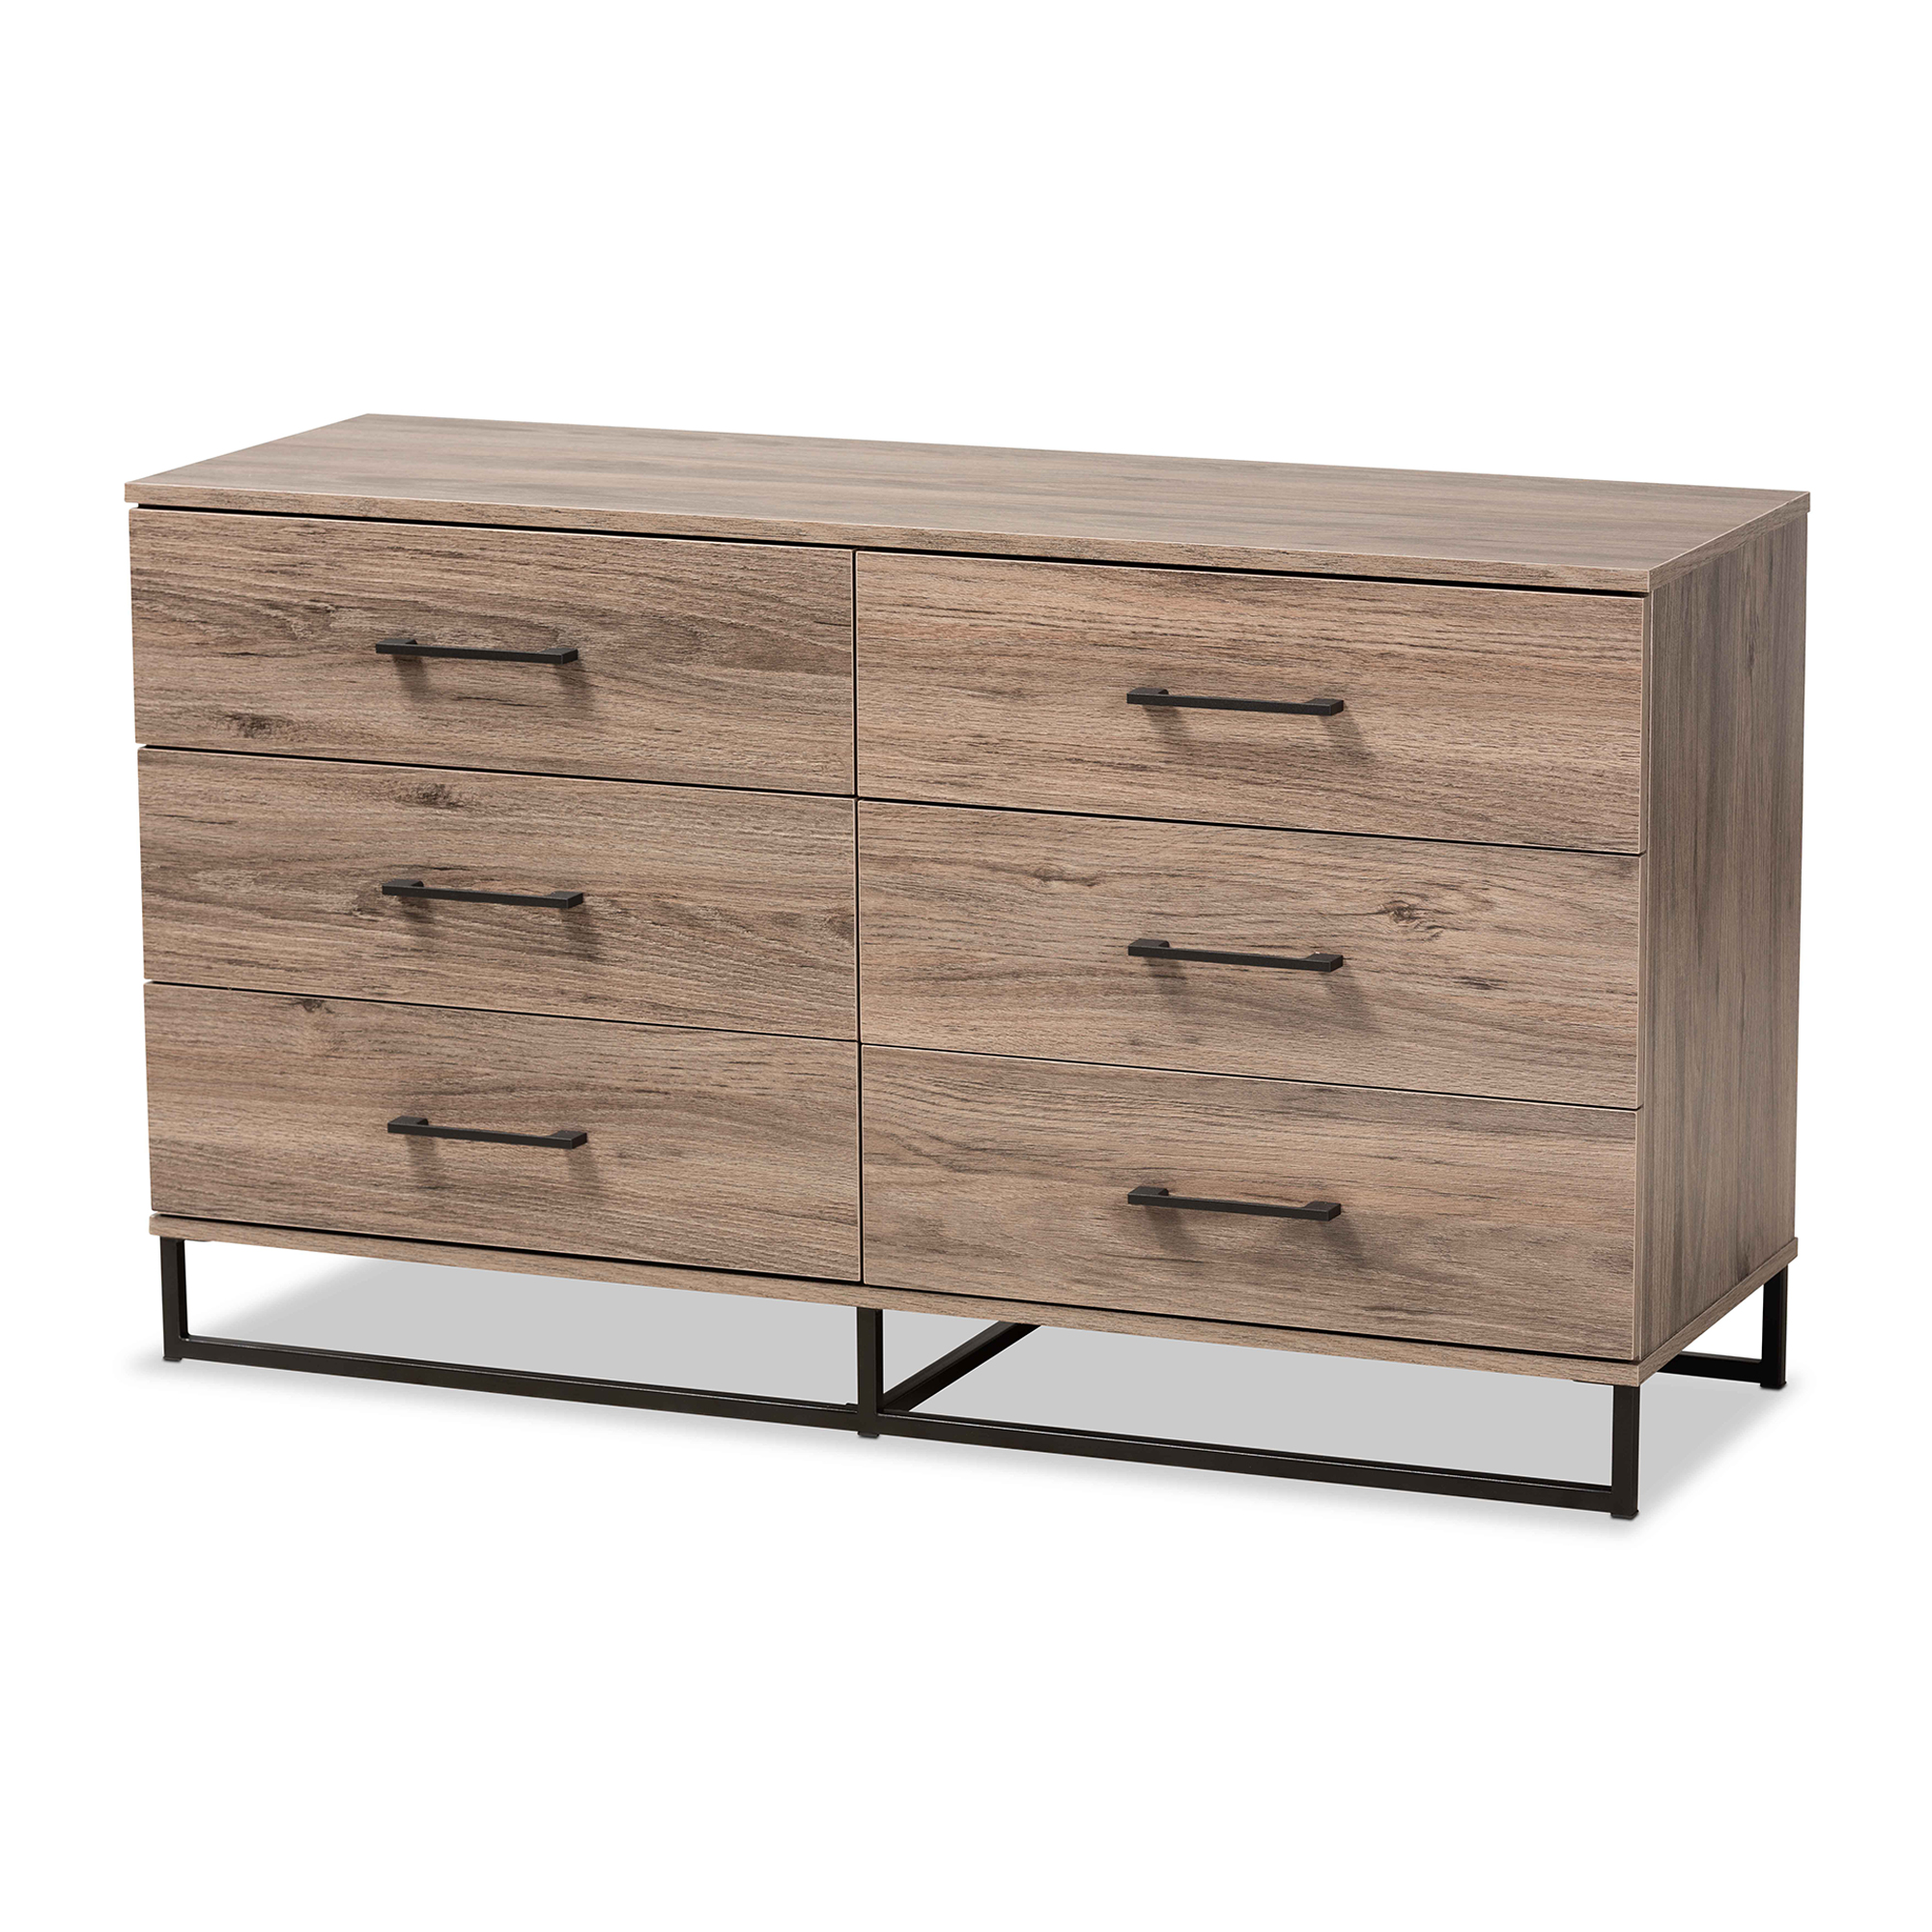 Baxton Studio Daxton Modern and Contemporary Rustic Oak Finished Wood 6-Drawer Dresser